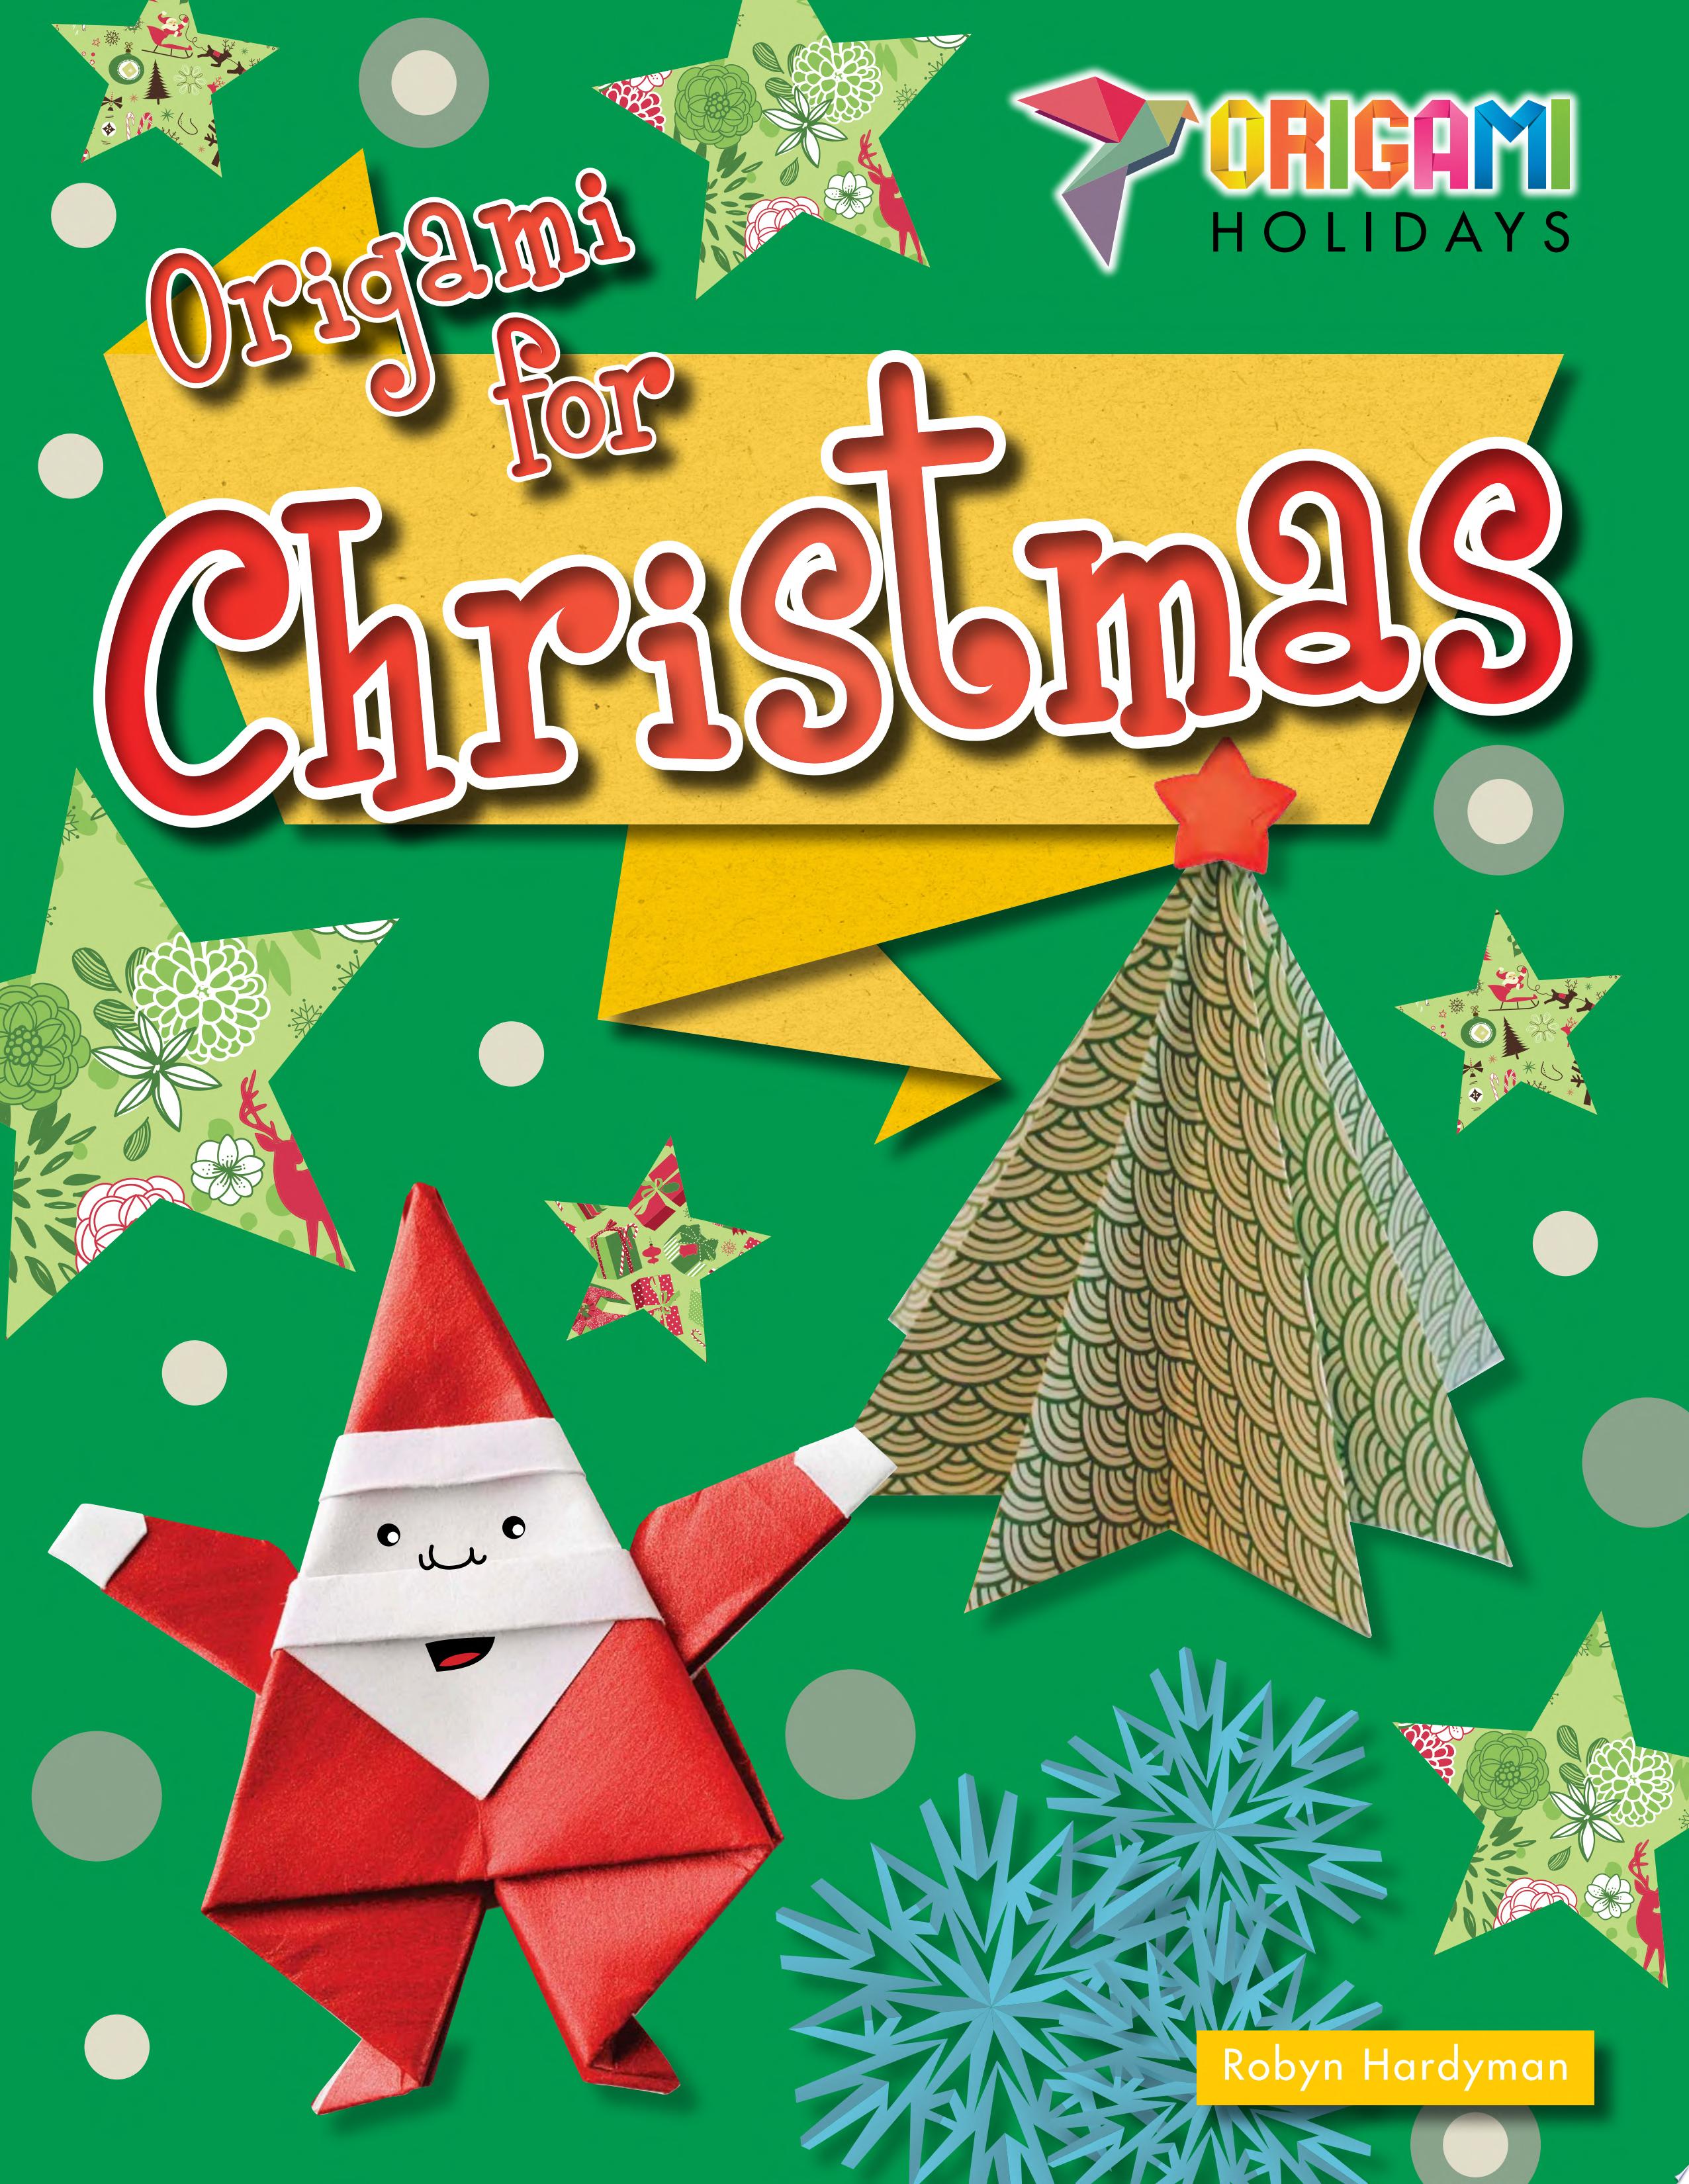 Image for "Origami for Christmas"